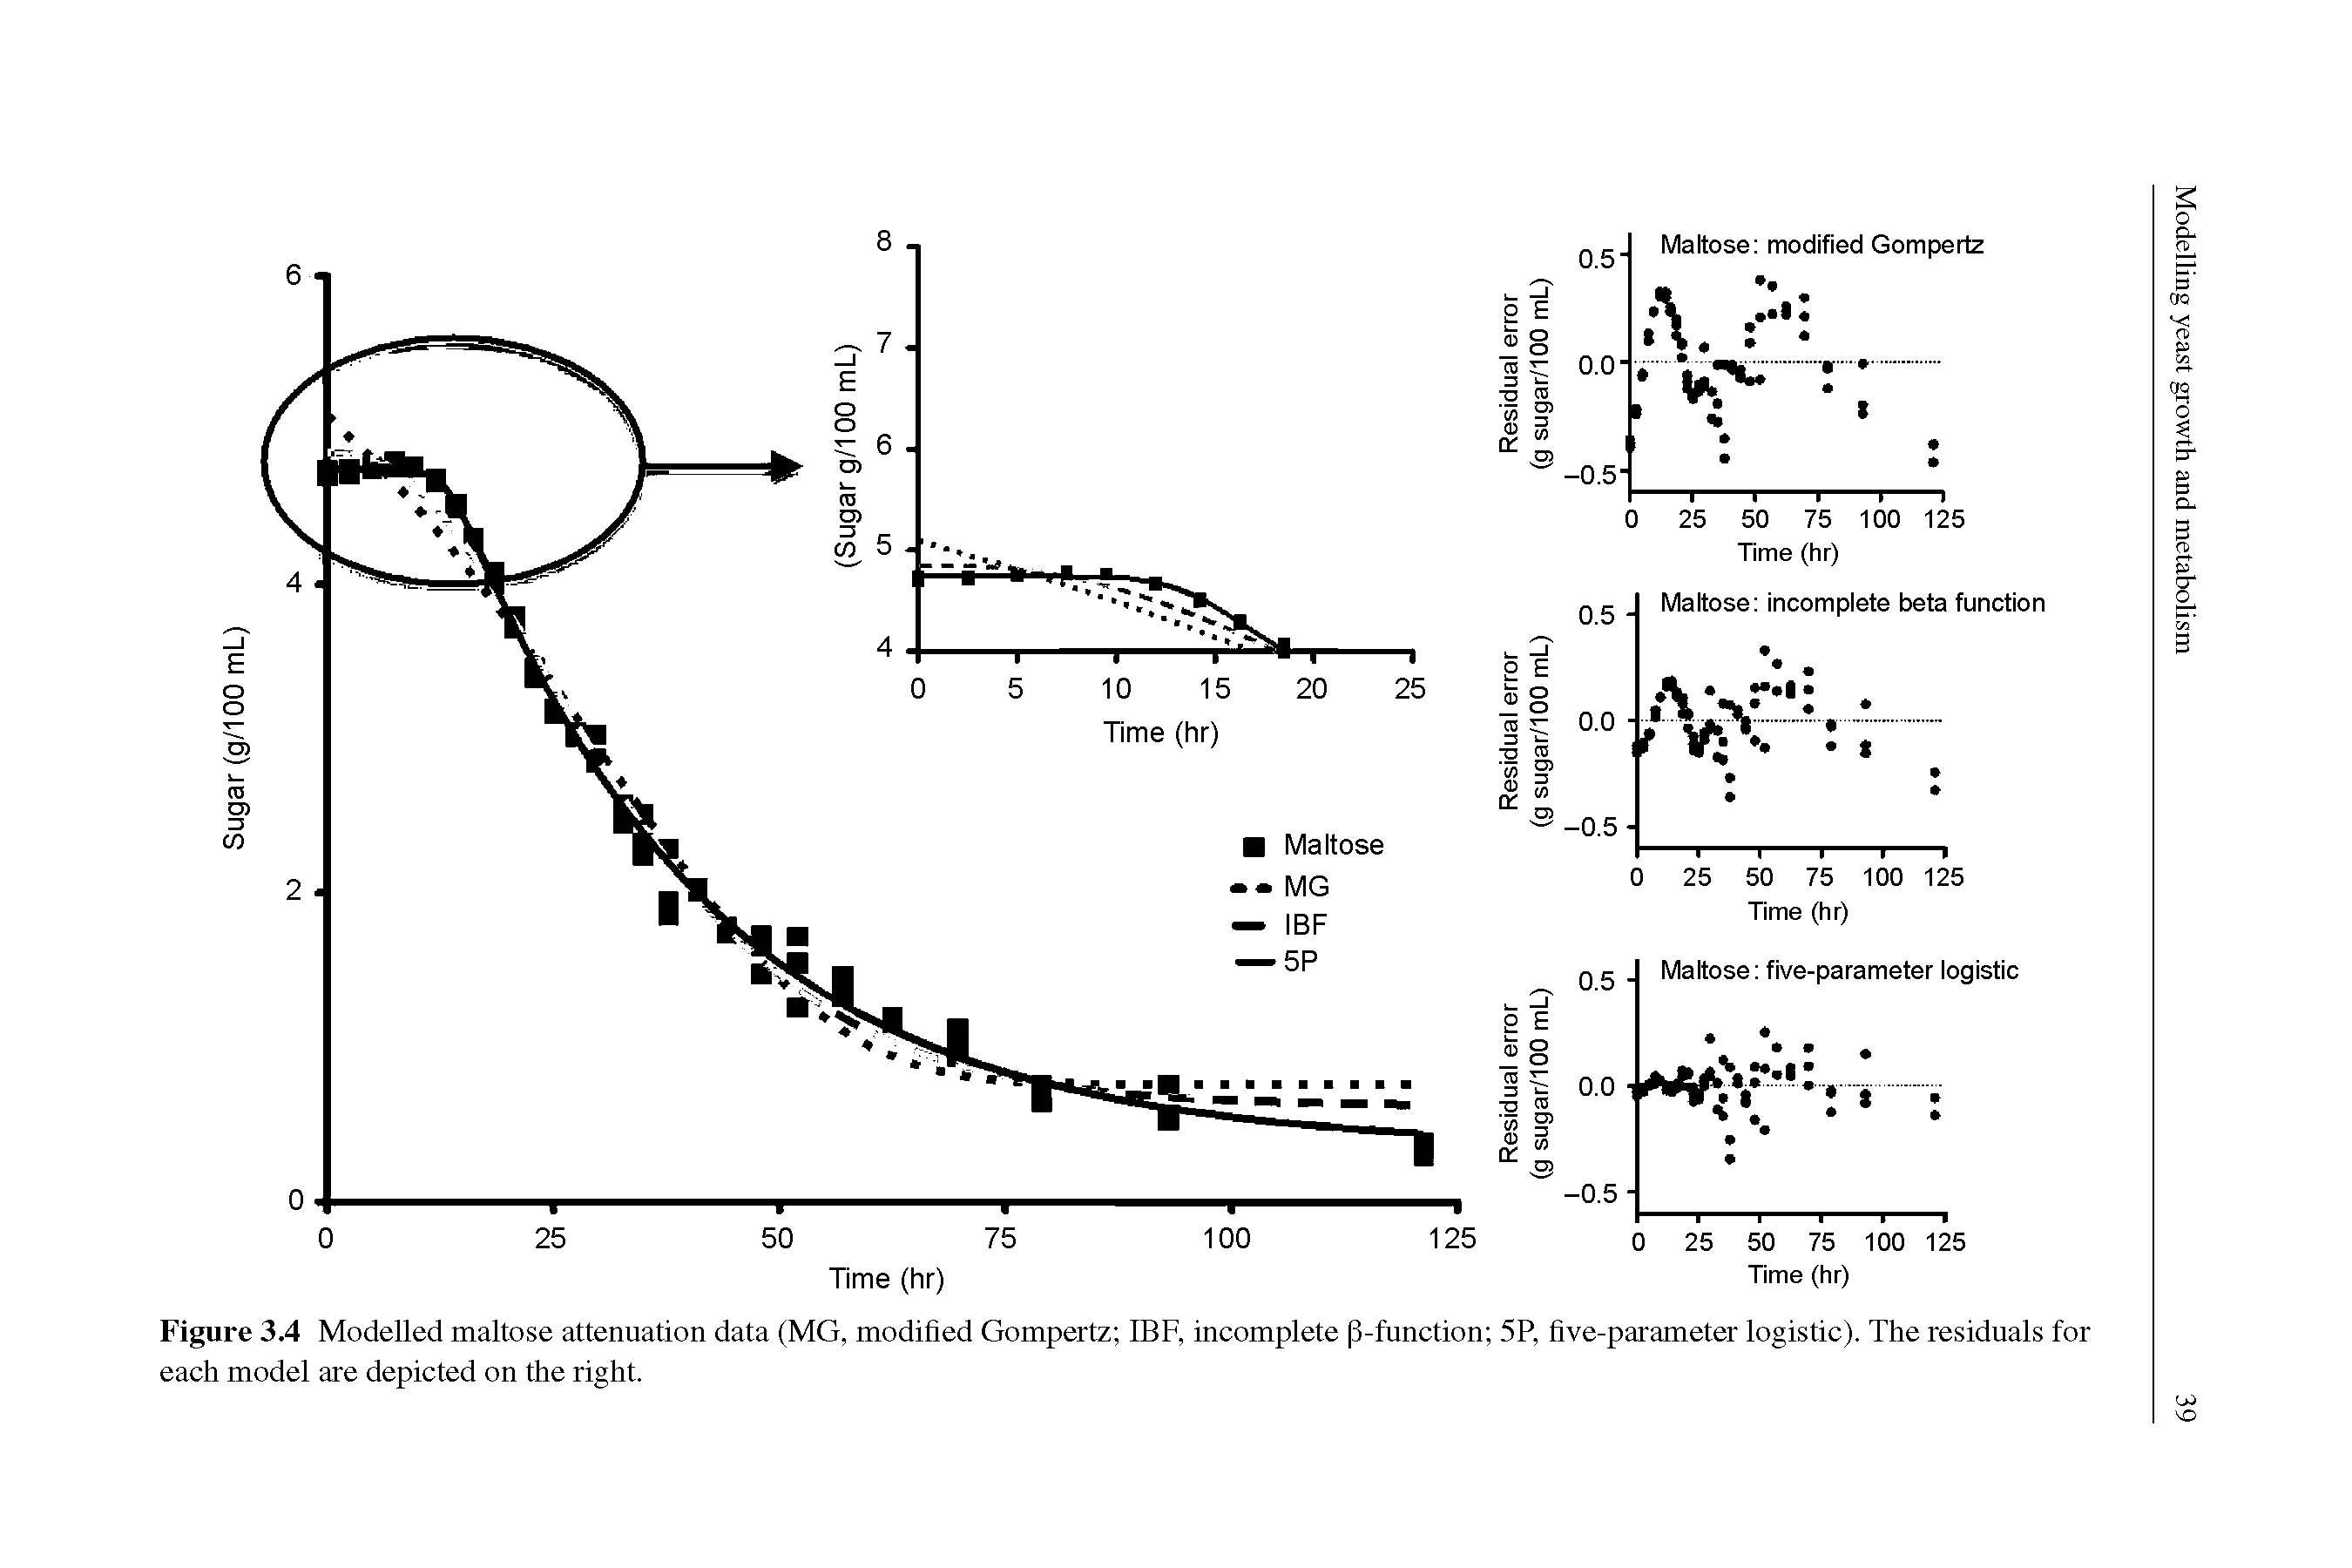 Figure 3.4 Modelled maltose attenuation data (MG, modified Gompertz IBF, incomplete 3-function 5P, five-parameter logistic). The residuals for each model are depicted on the right.